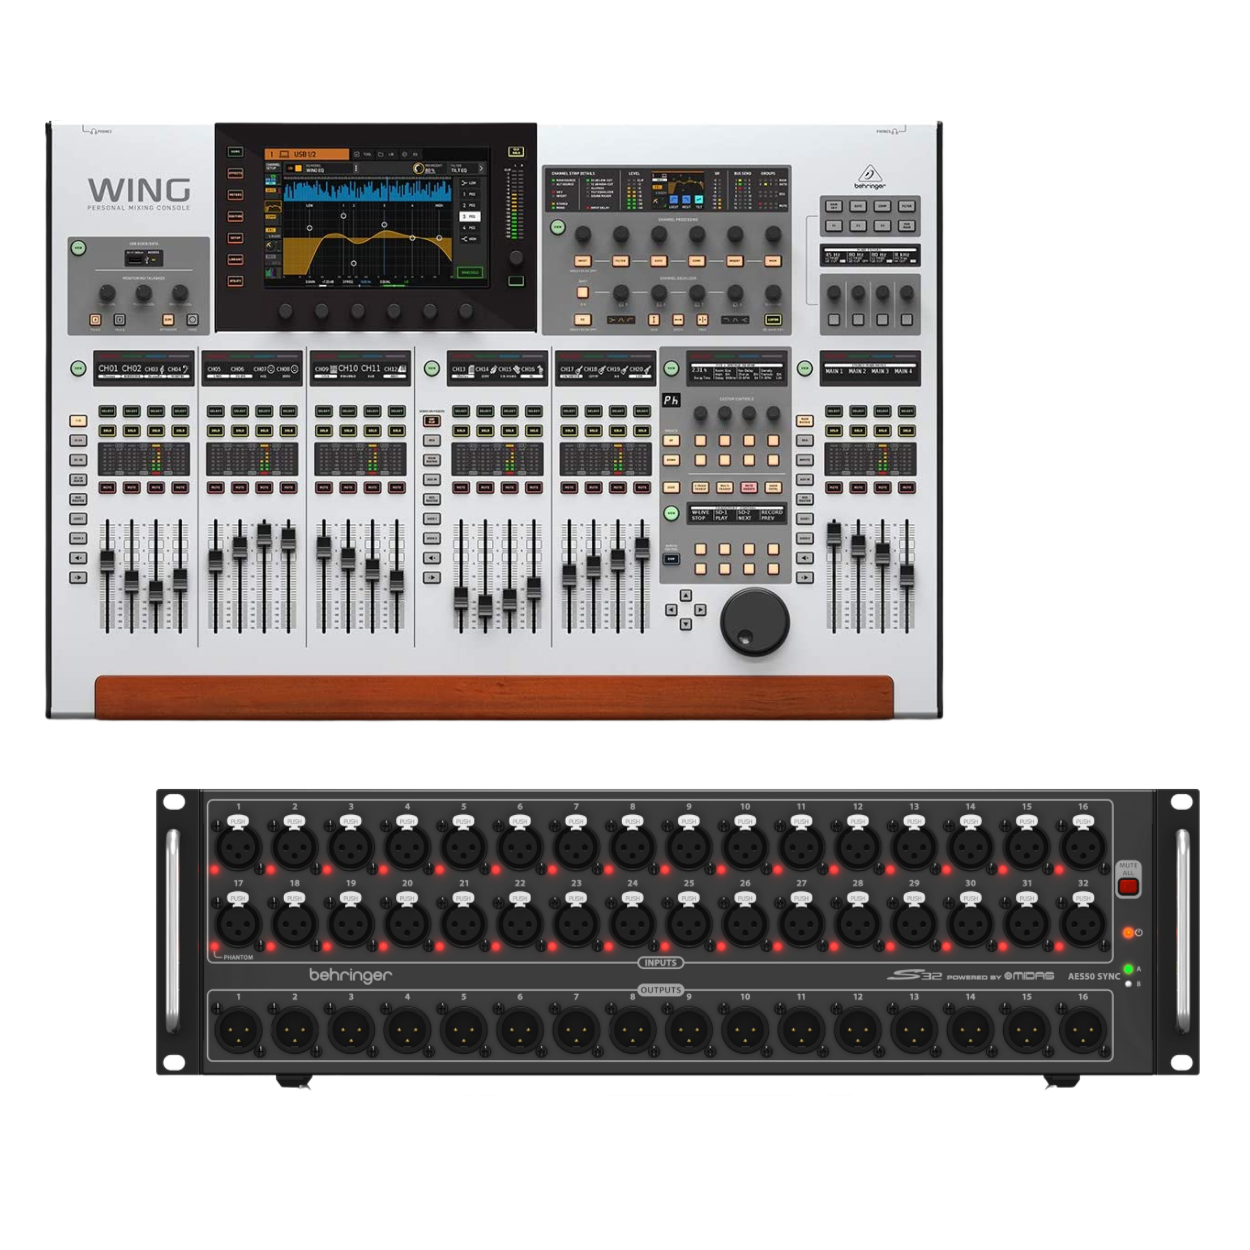 Behringer WING 48-channel Digital Mixer with S32 32-channel Stage Box (S-32) | BEHRINGER , Zoso Music